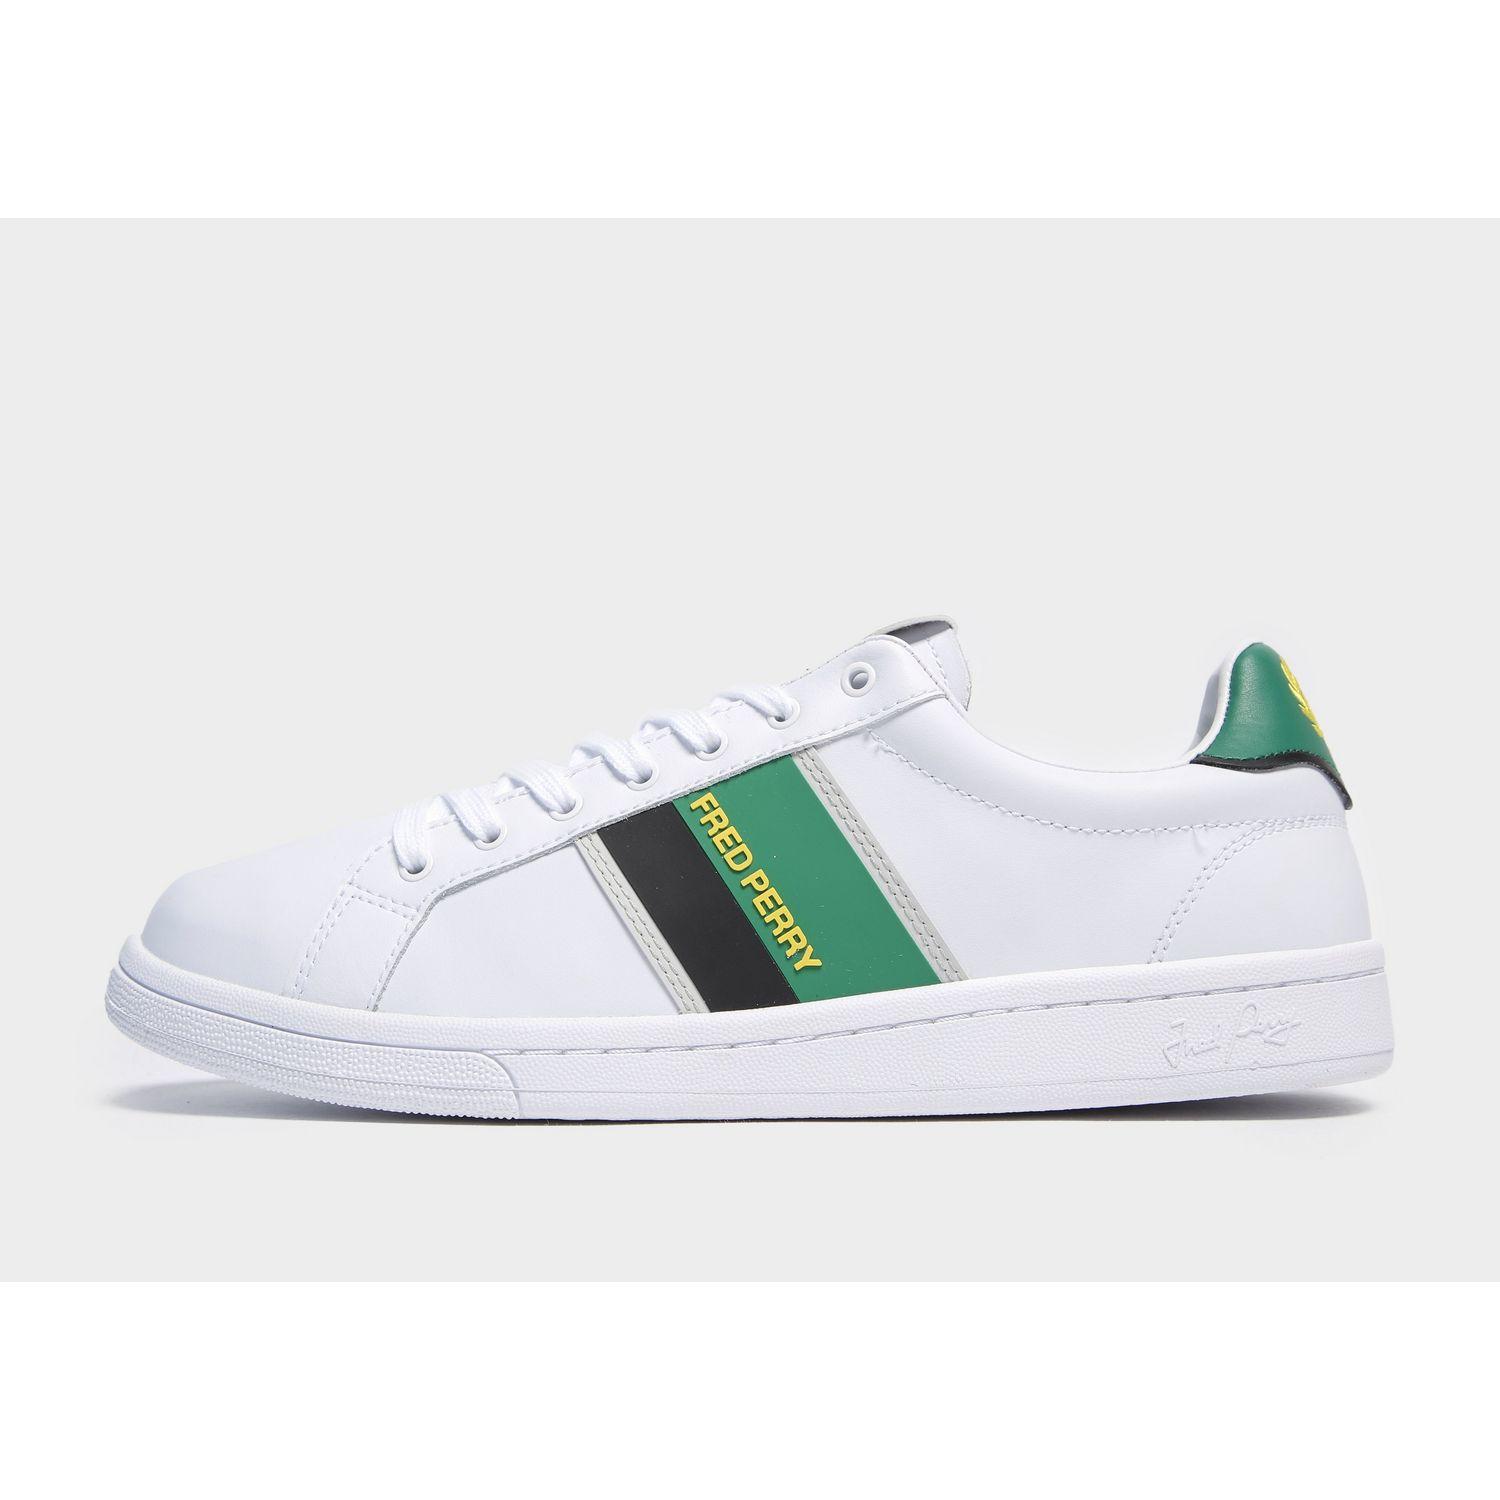 Fred Perry Leather Two Tone B721 in White/Green/Black (White) for Men - Lyst